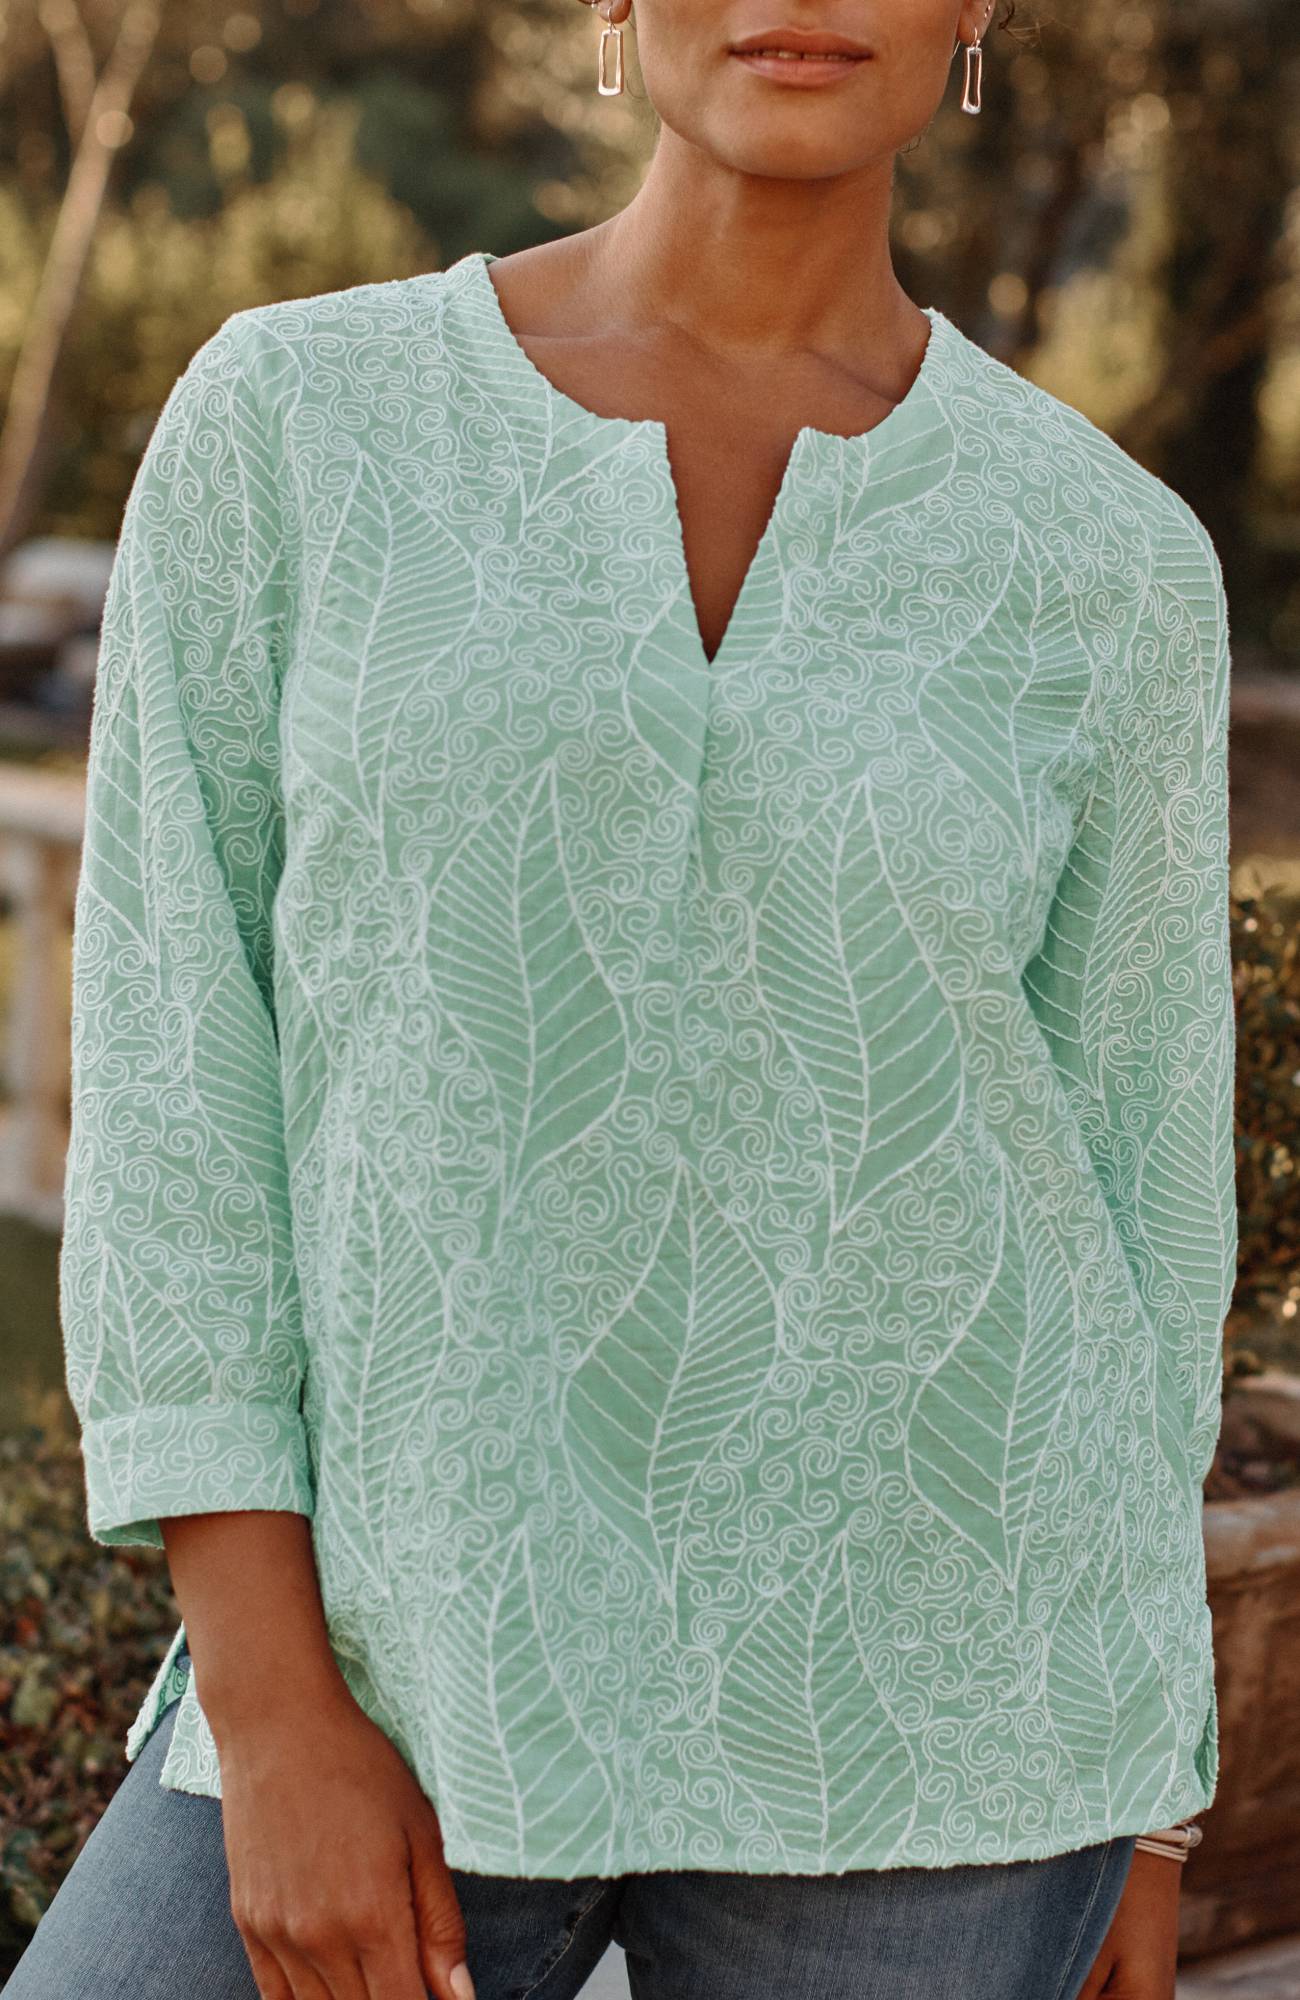 Rope-Embroidery Popover Top